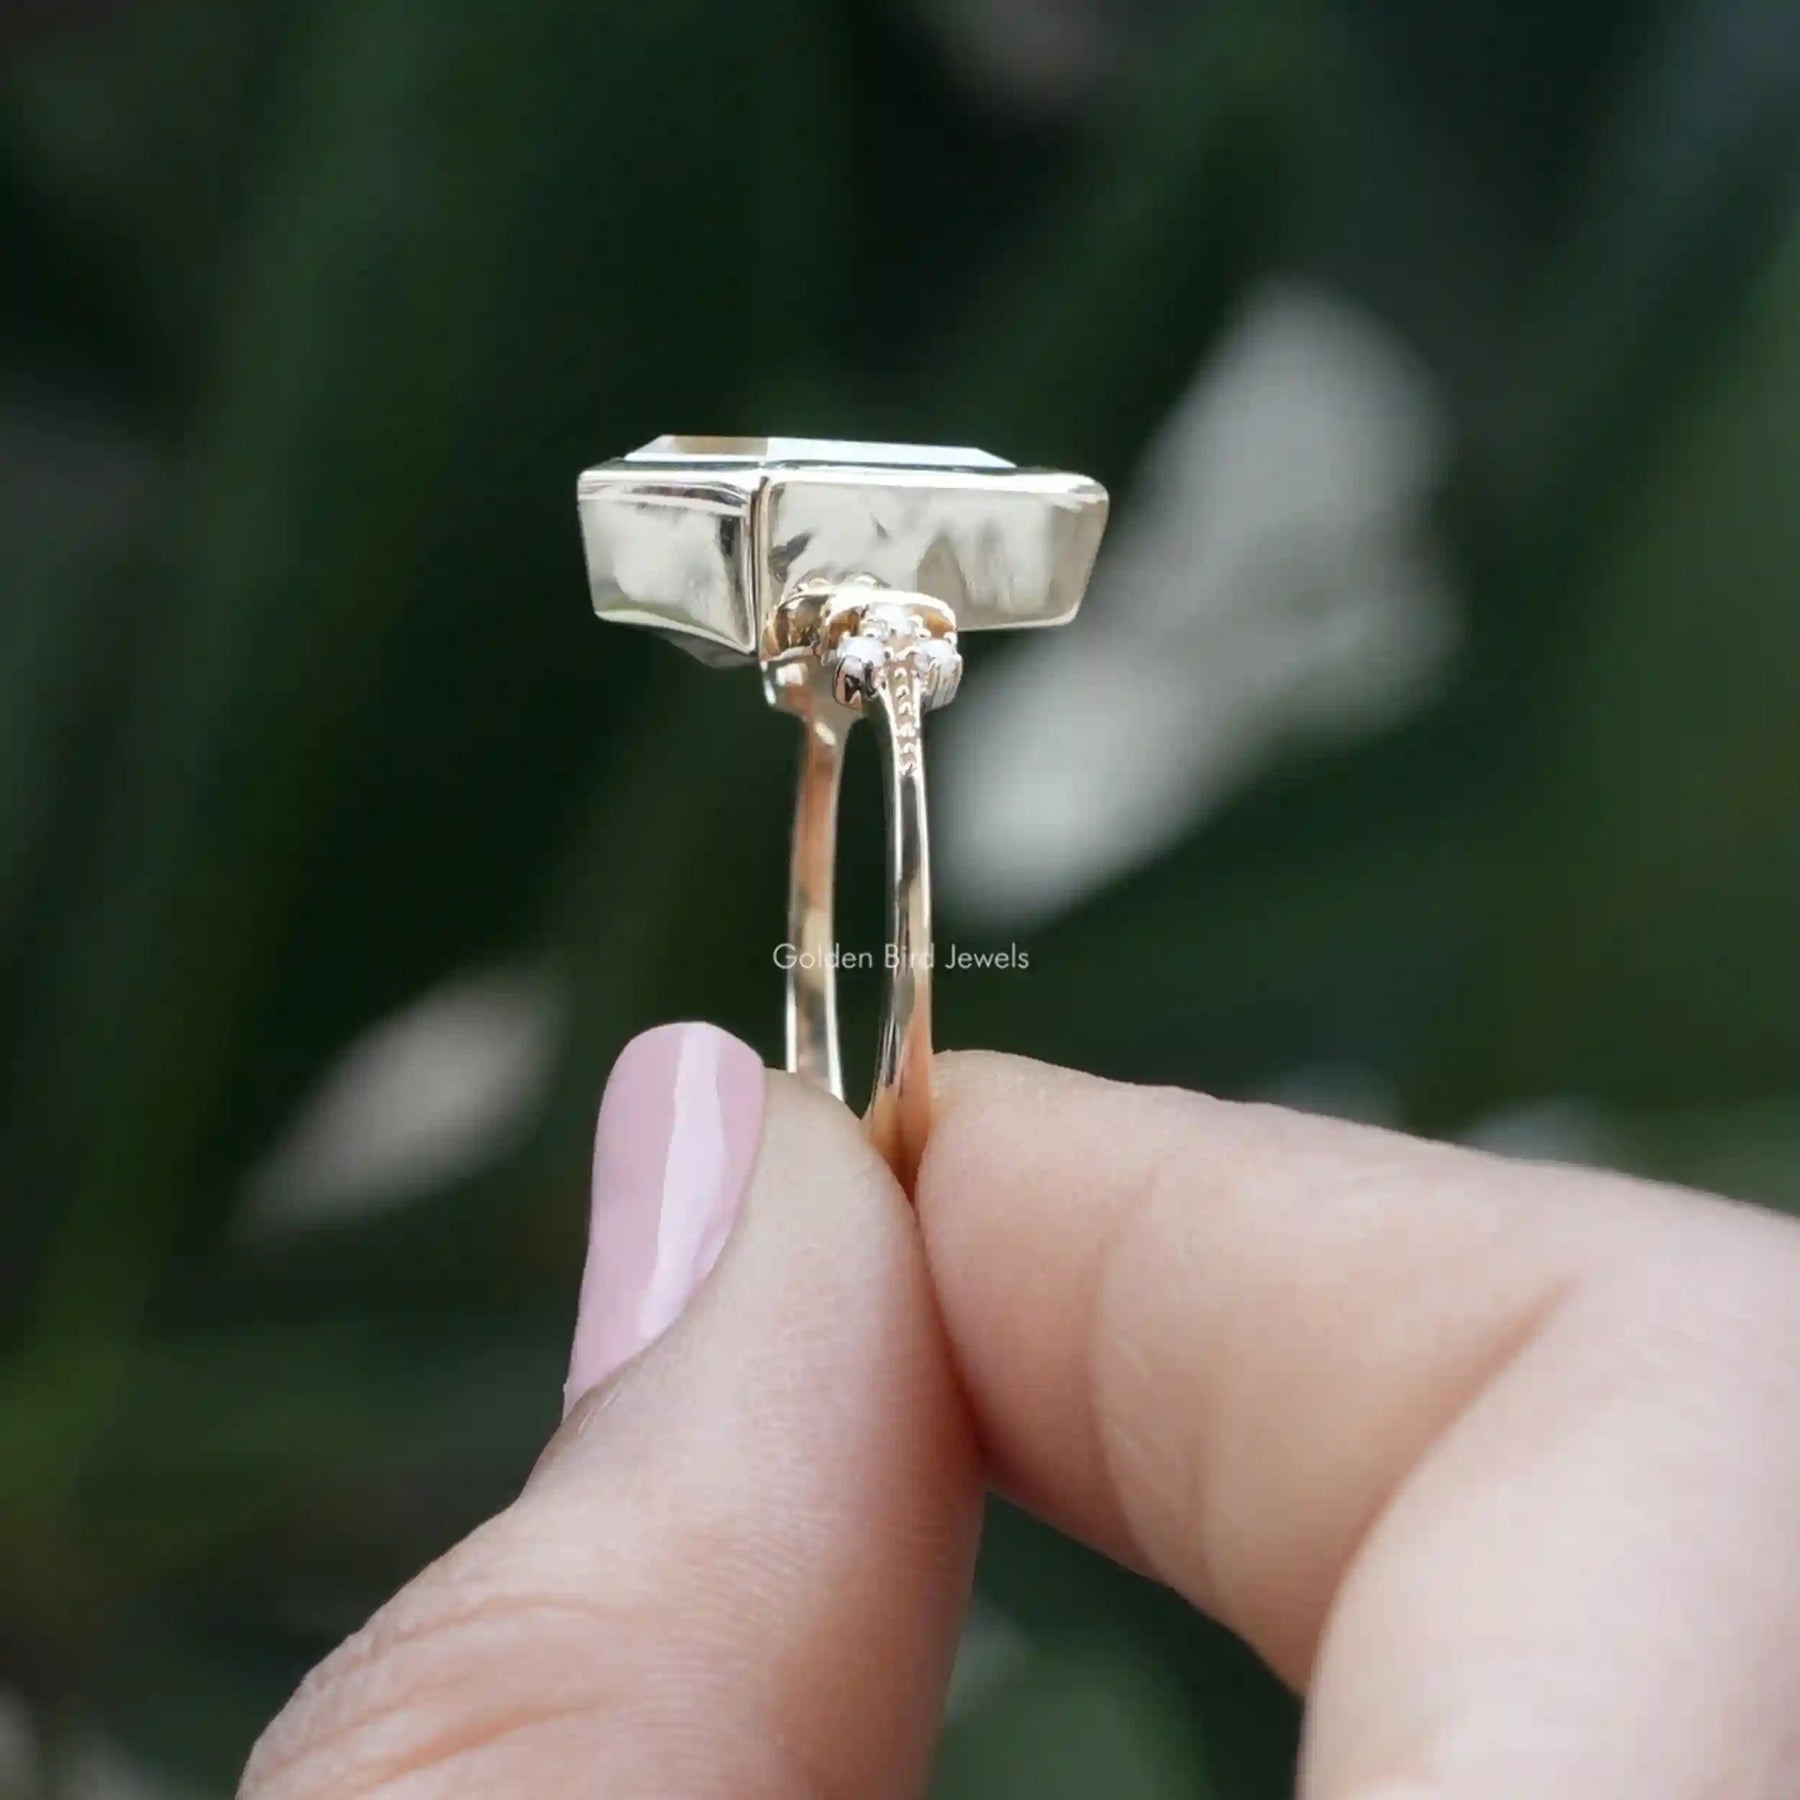 [Side view of kite shaped moissanite engagement ring in 14k yellow gold]-[Golden Bird Jewels]